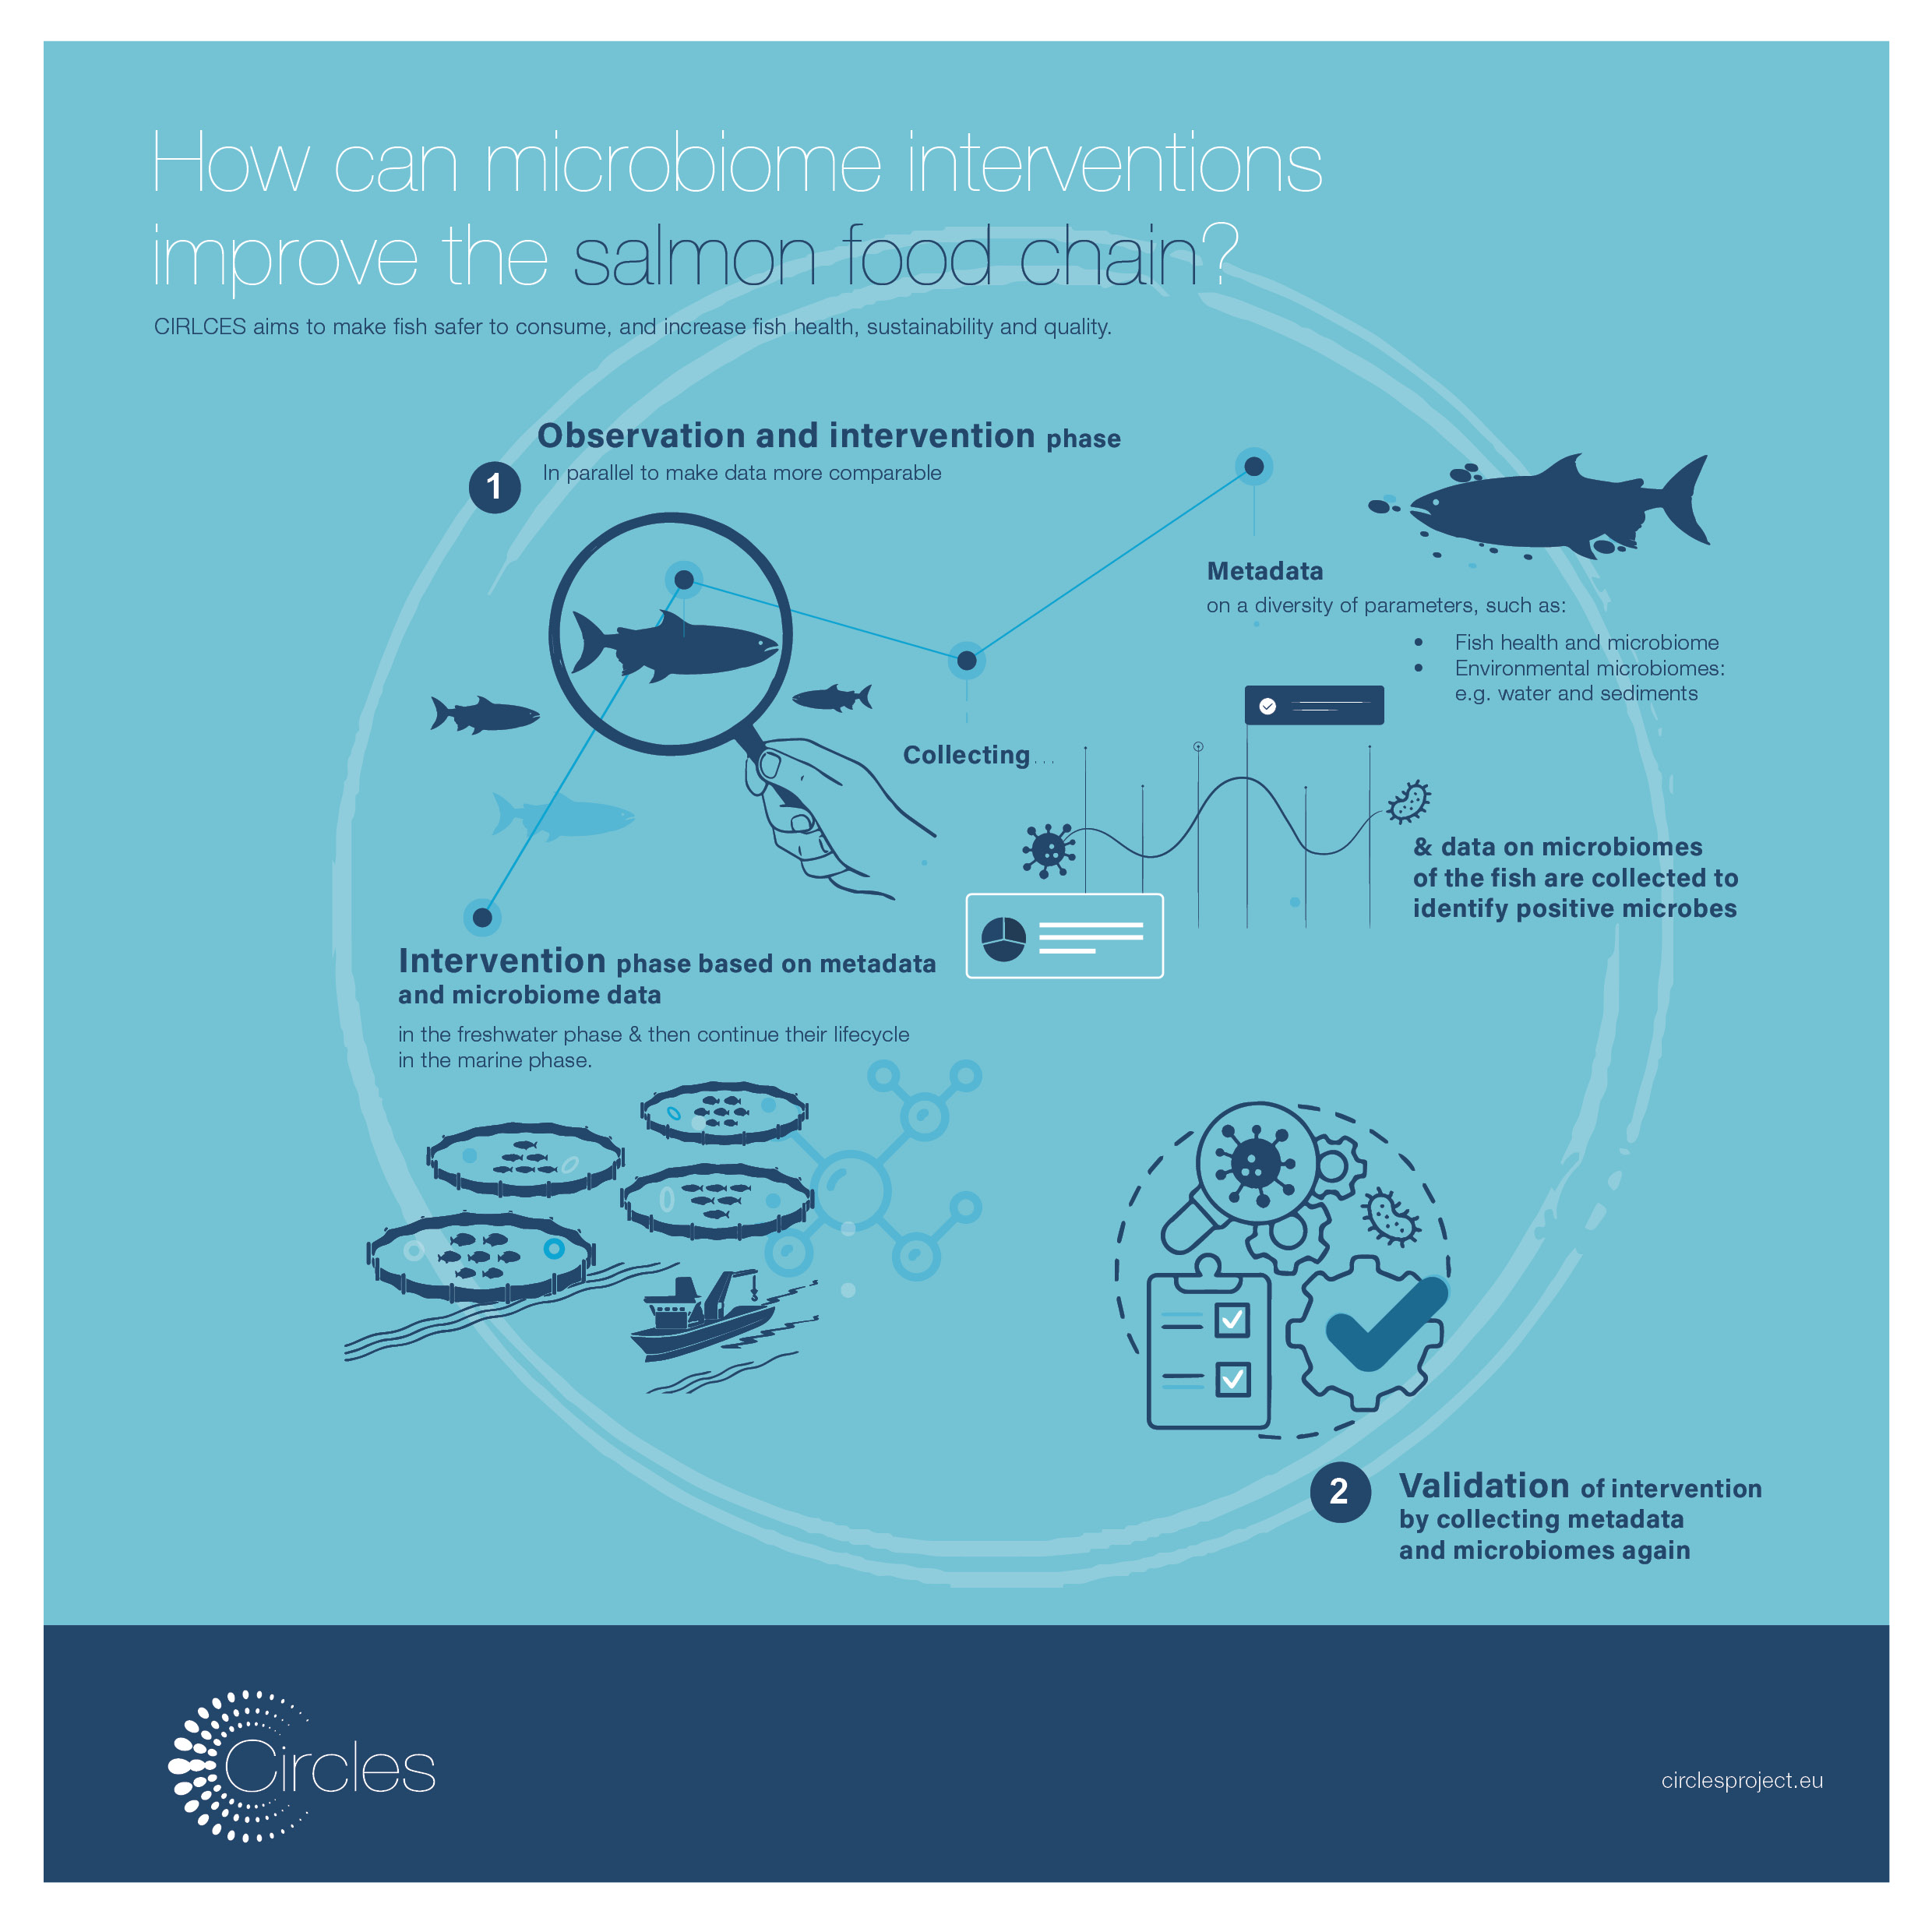 The role of the microbiome in aquaculture – CIRCLES research on seabream and salmon